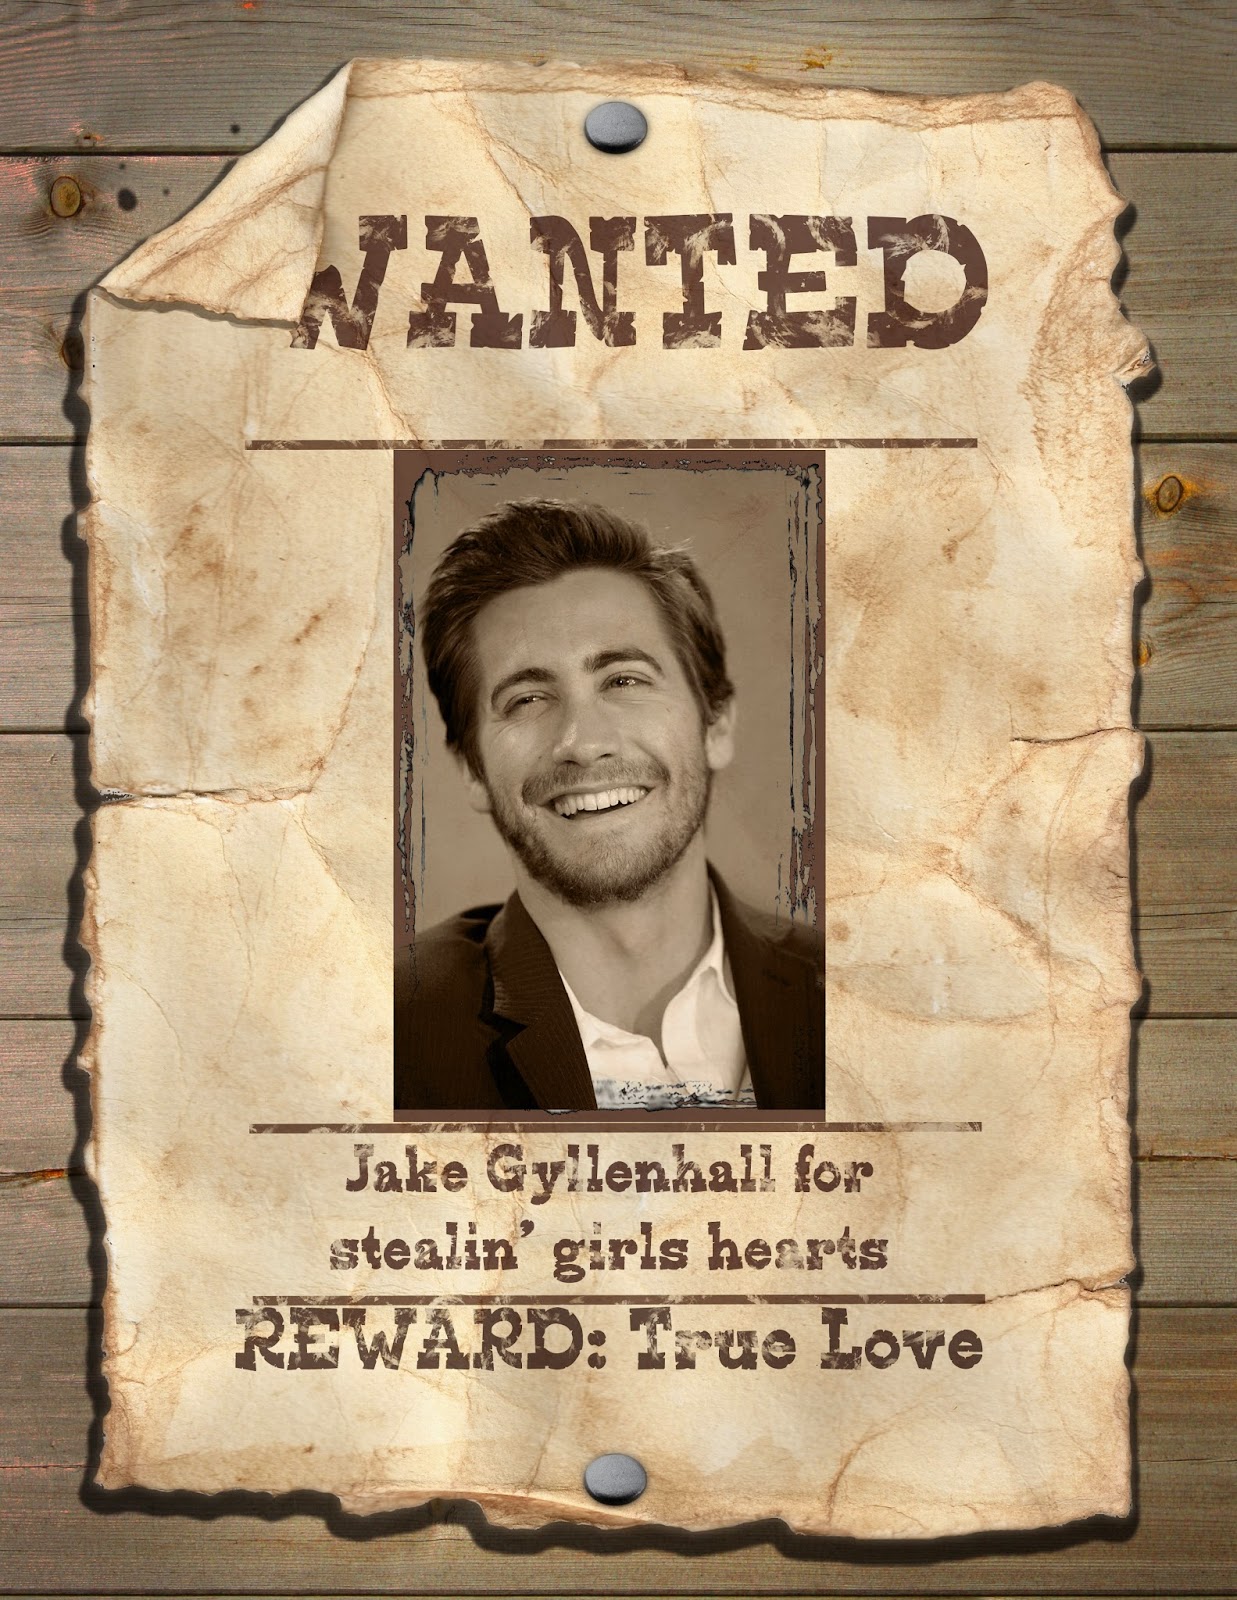 BrittneyB6: wanted poster